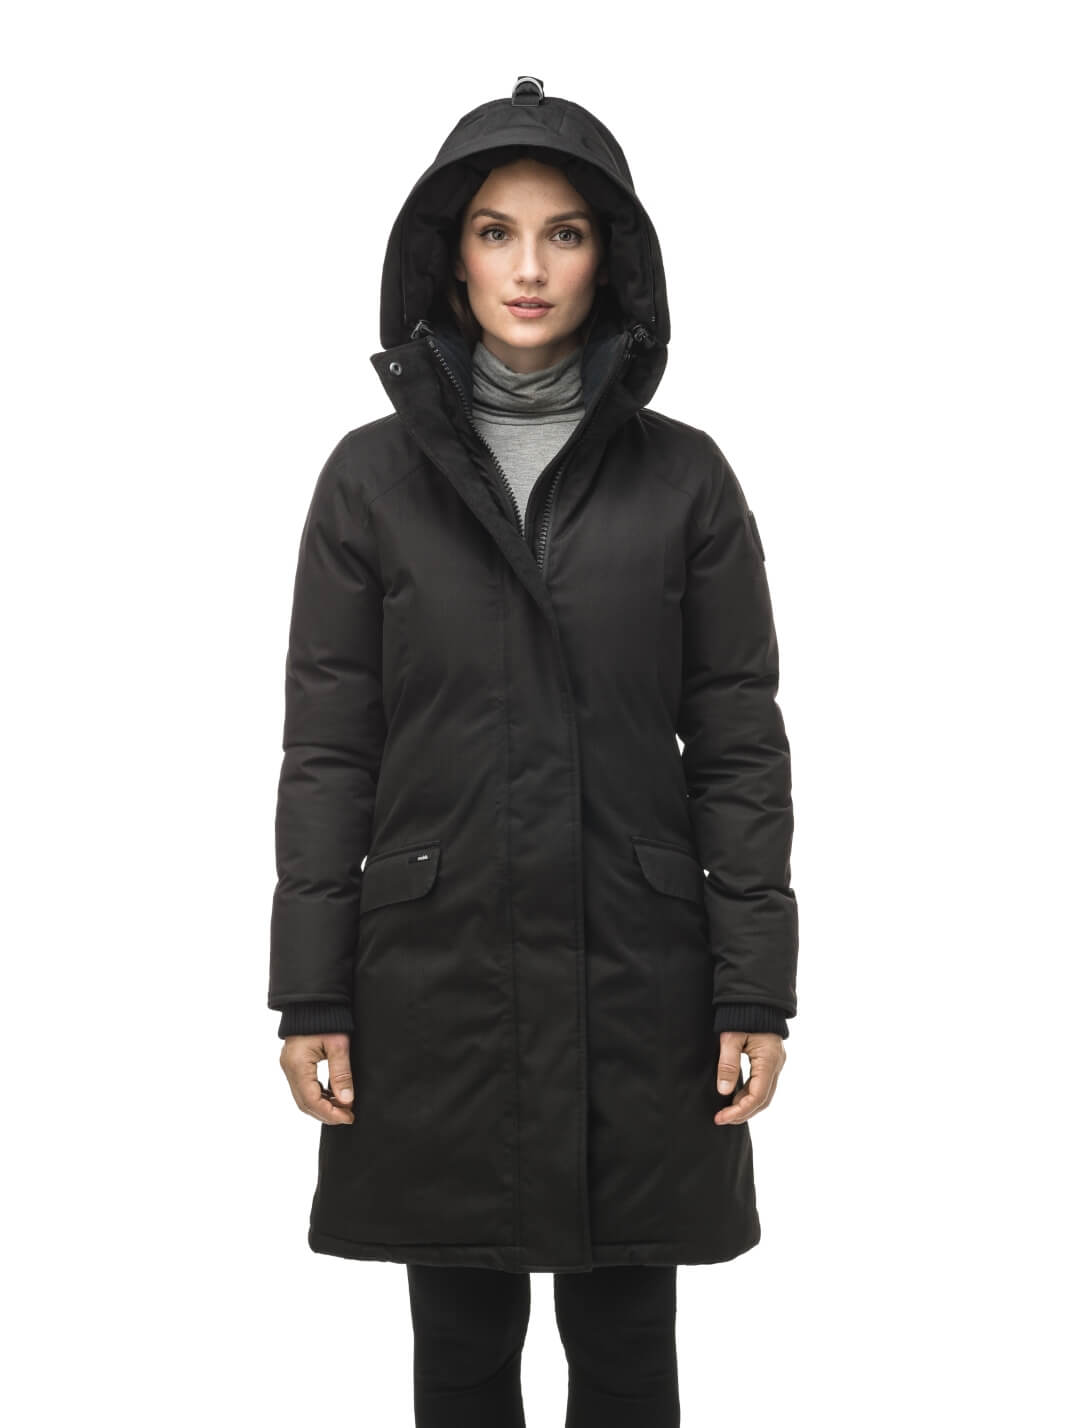 Rebecca Women's Parka in knee length, Canadian duck down insulation, two-way zipper with magnetic front placket, non-removable hood with removable coyote fur trim, in Black